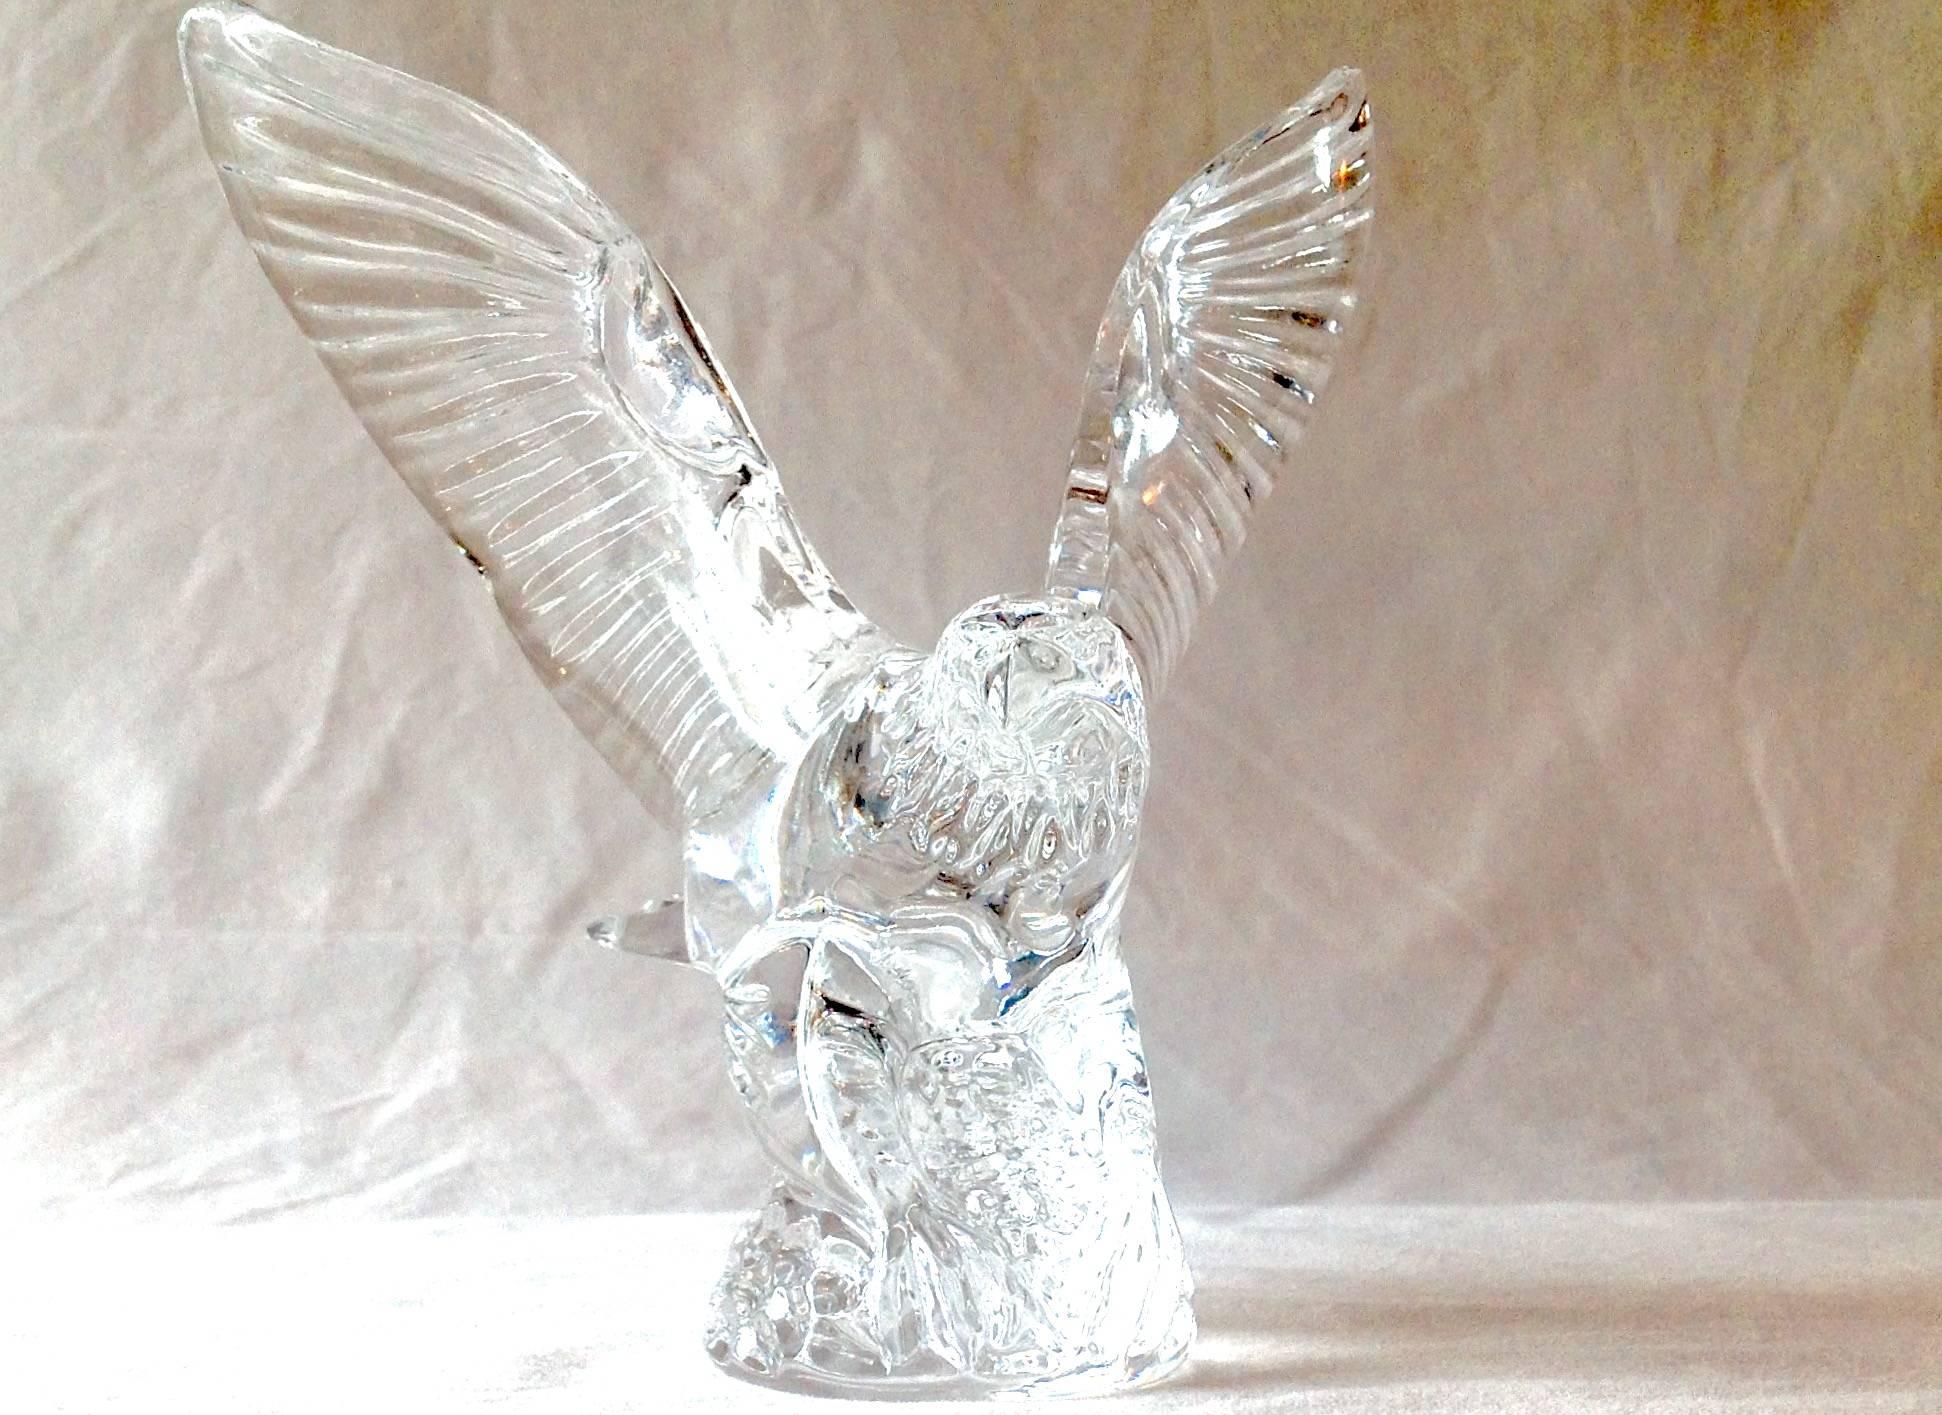 Signed waterford crystal eagle figurine, measures 6.5 inches wide and 7 inches high. Brilliant cut. Nice desk accessory or shelf display piece.